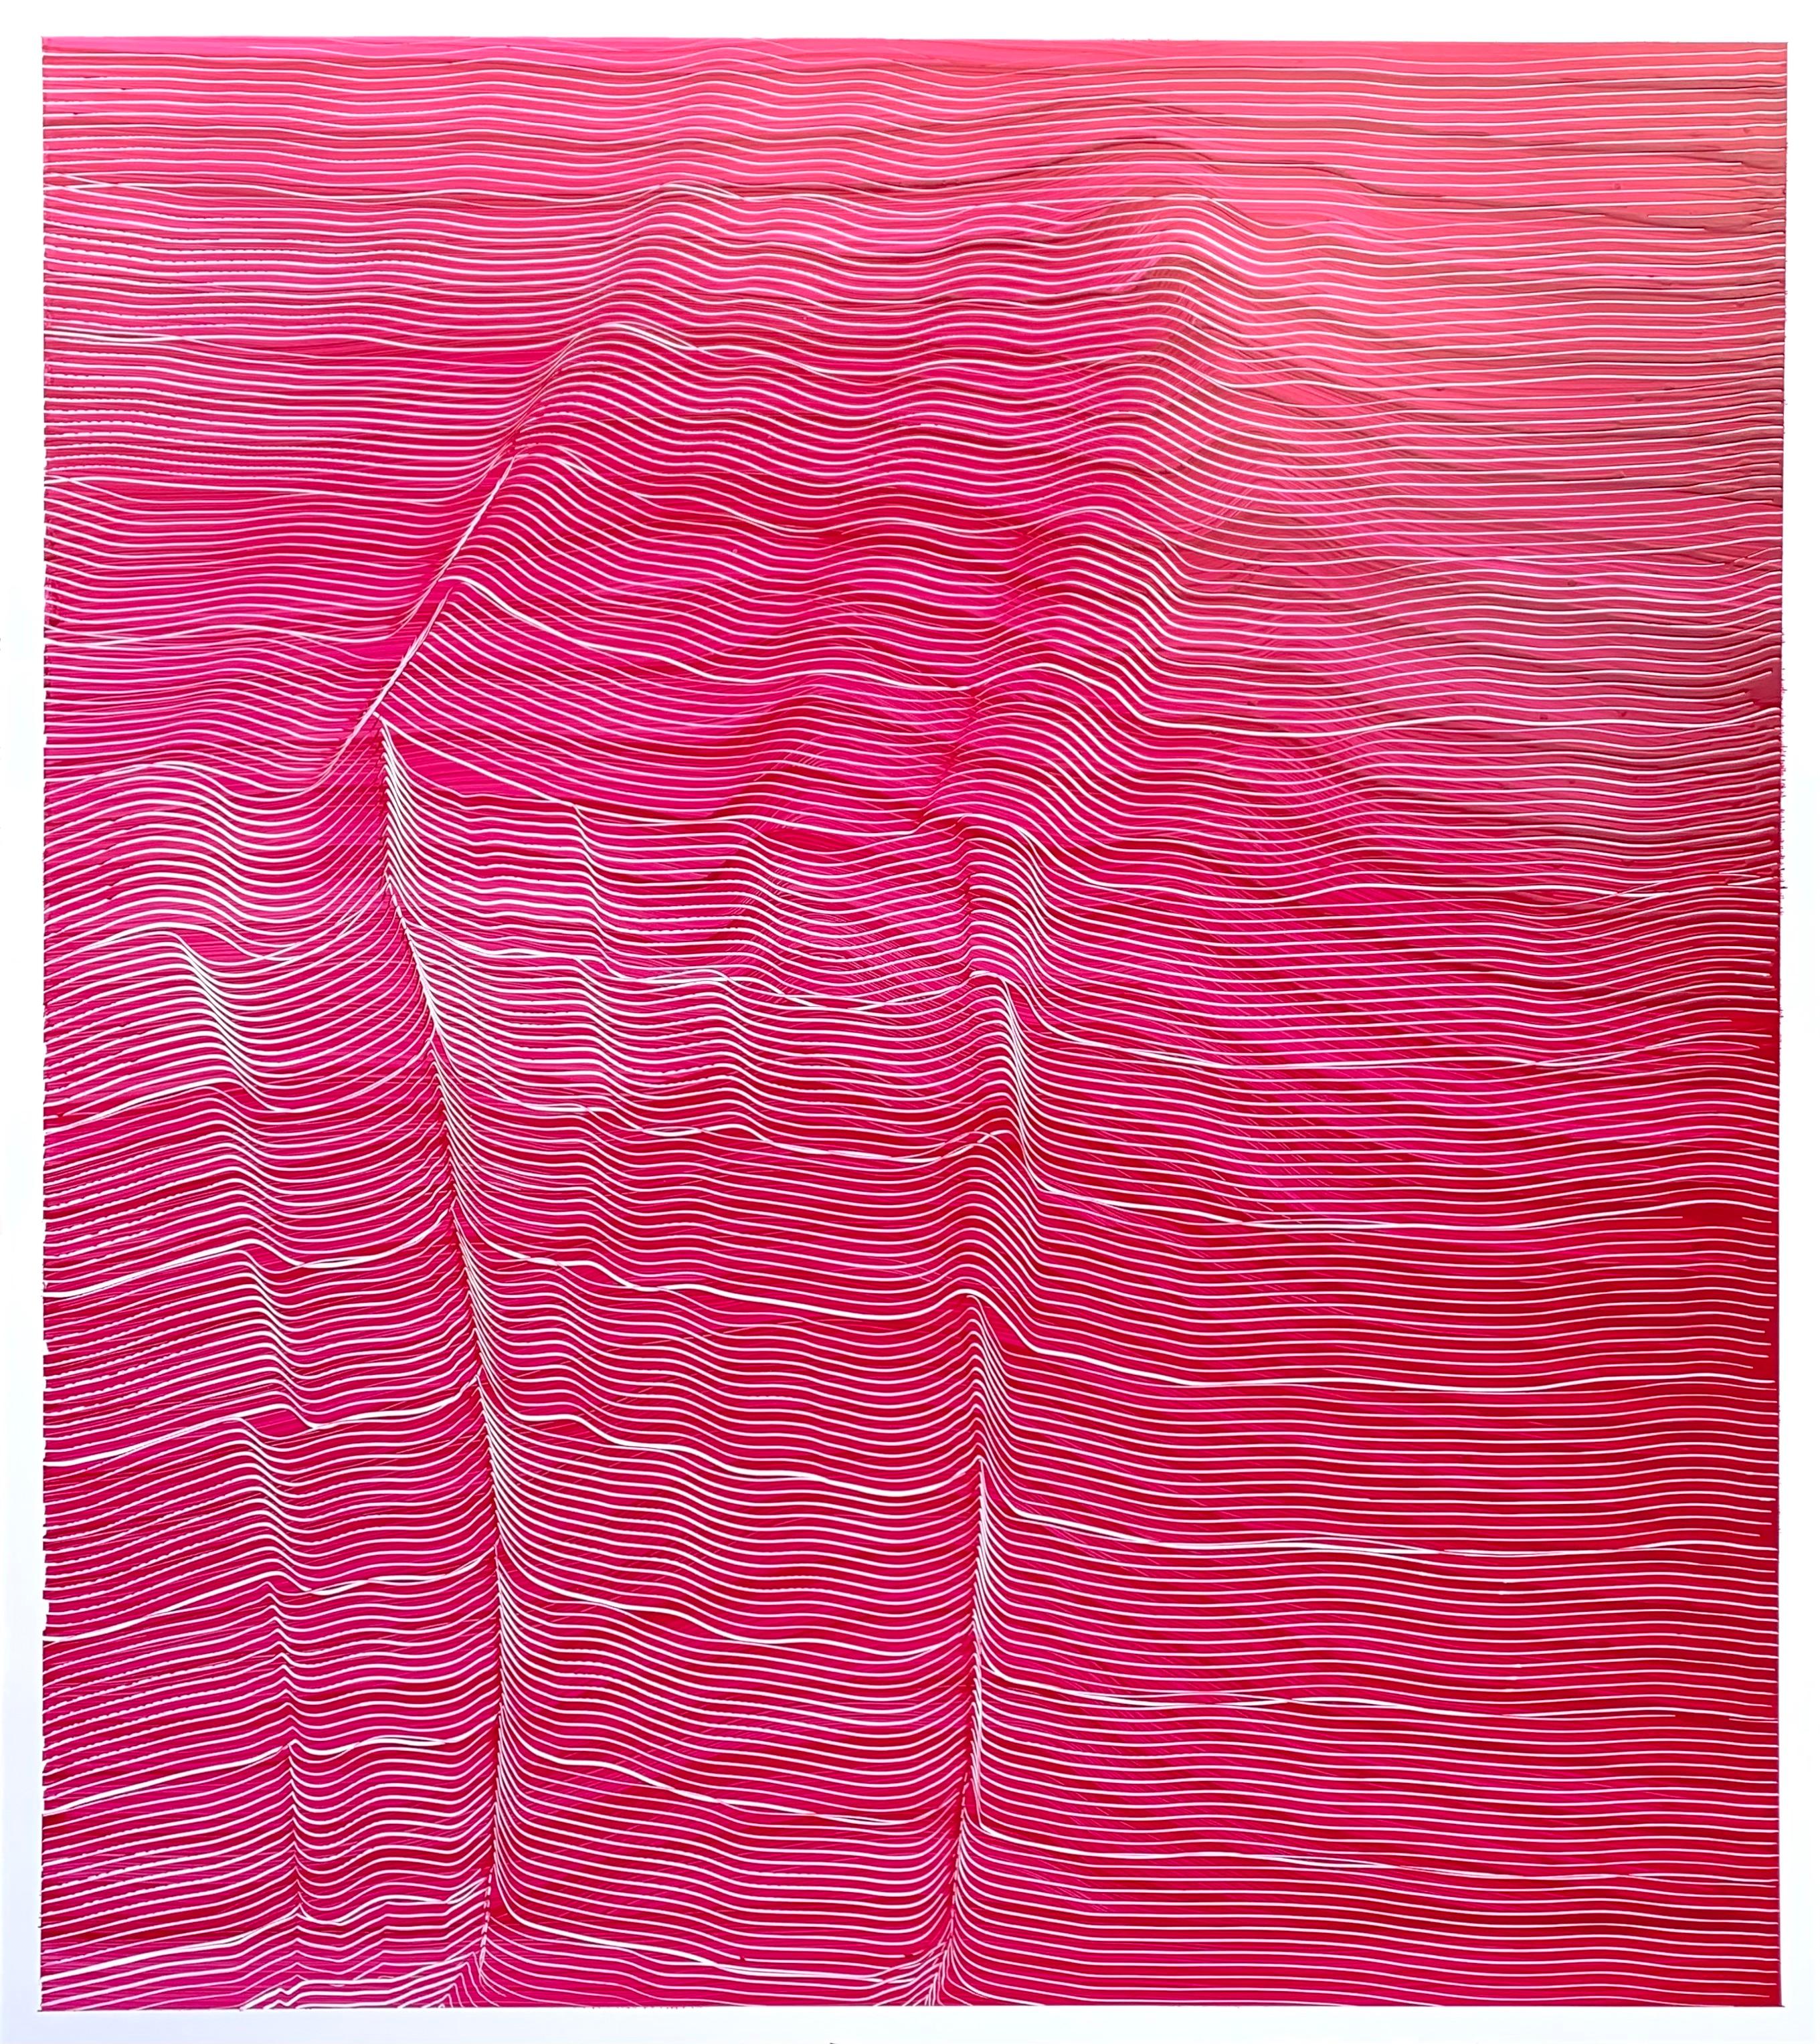 Maria José Benvenuto  Abstract Painting - 'White strokes over pink', 2021, Colourful abstract work on acrylic panel